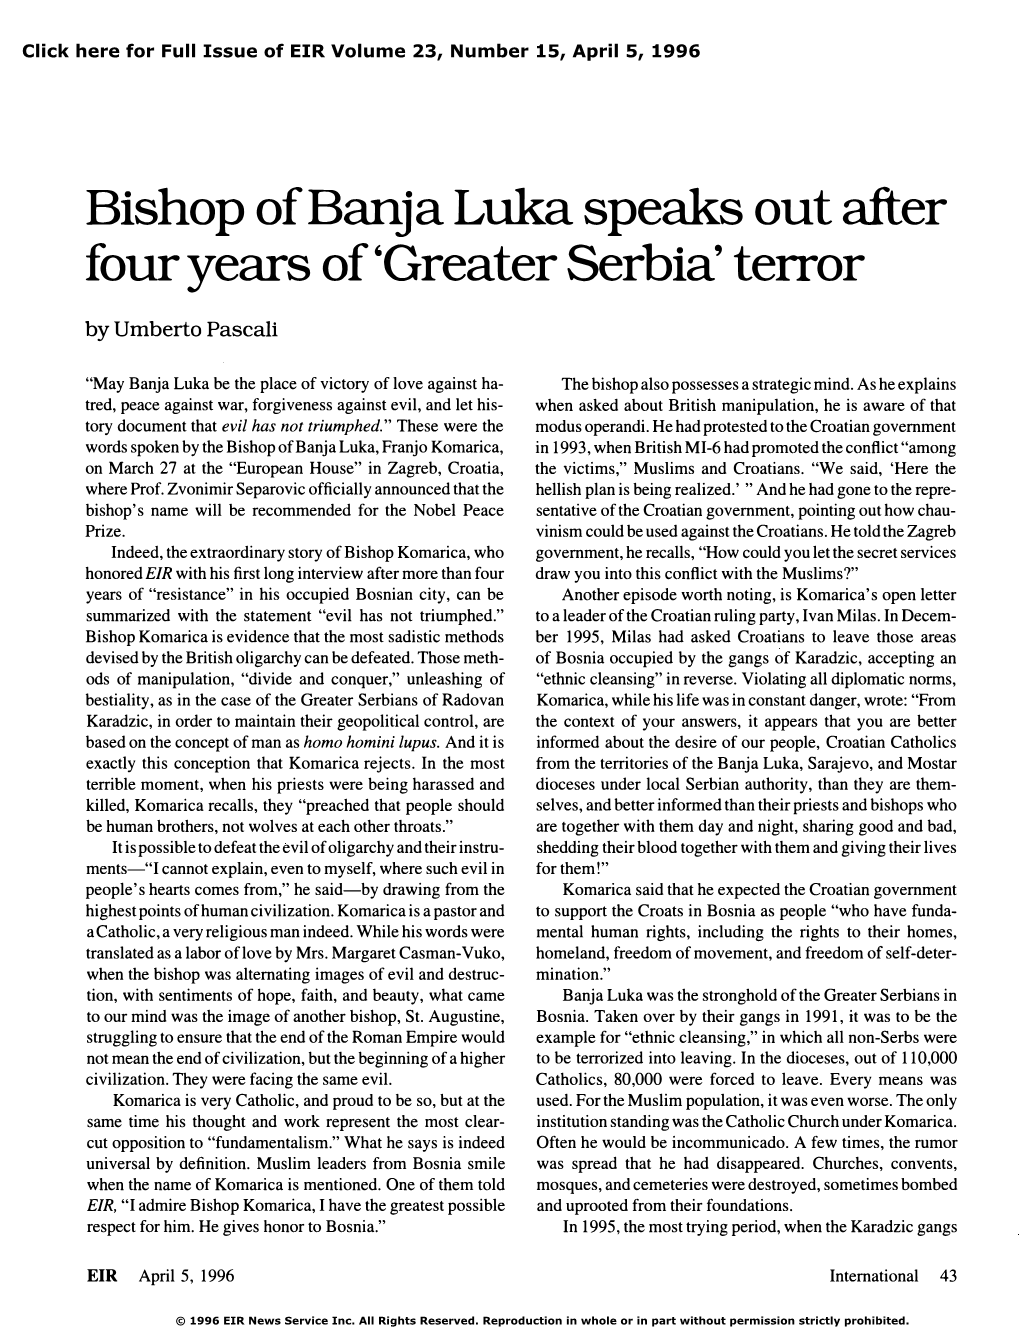 Bishop of Banja Luka Speaks out After Four Years of 'Greater Serbia' Terror